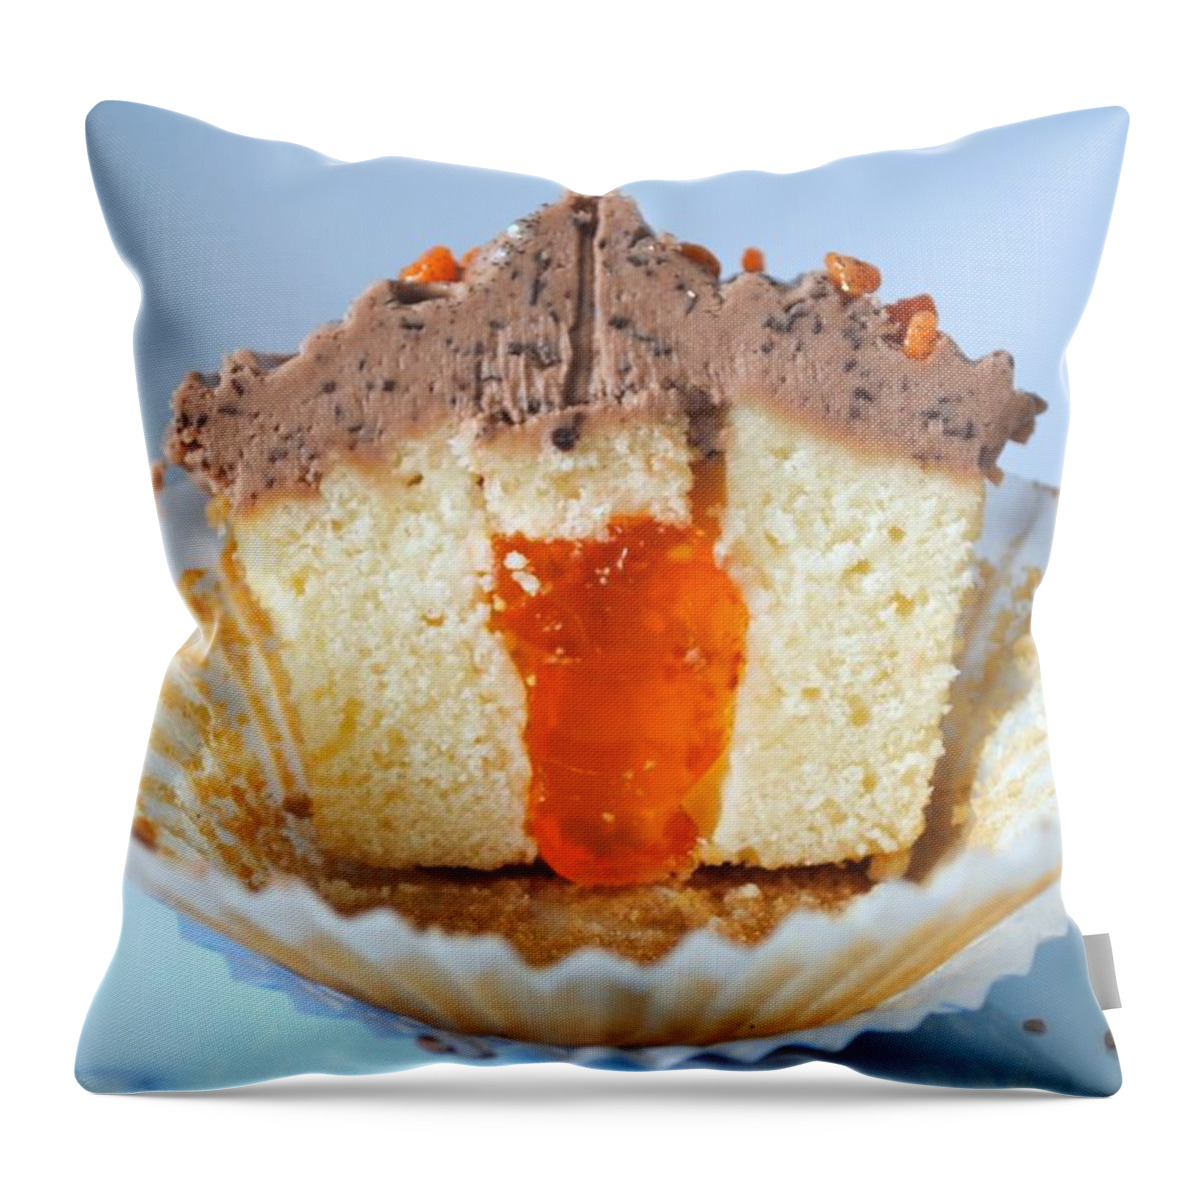 Unhealthy Eating Throw Pillow featuring the photograph Jaffa Cupcake by Torie Jayne